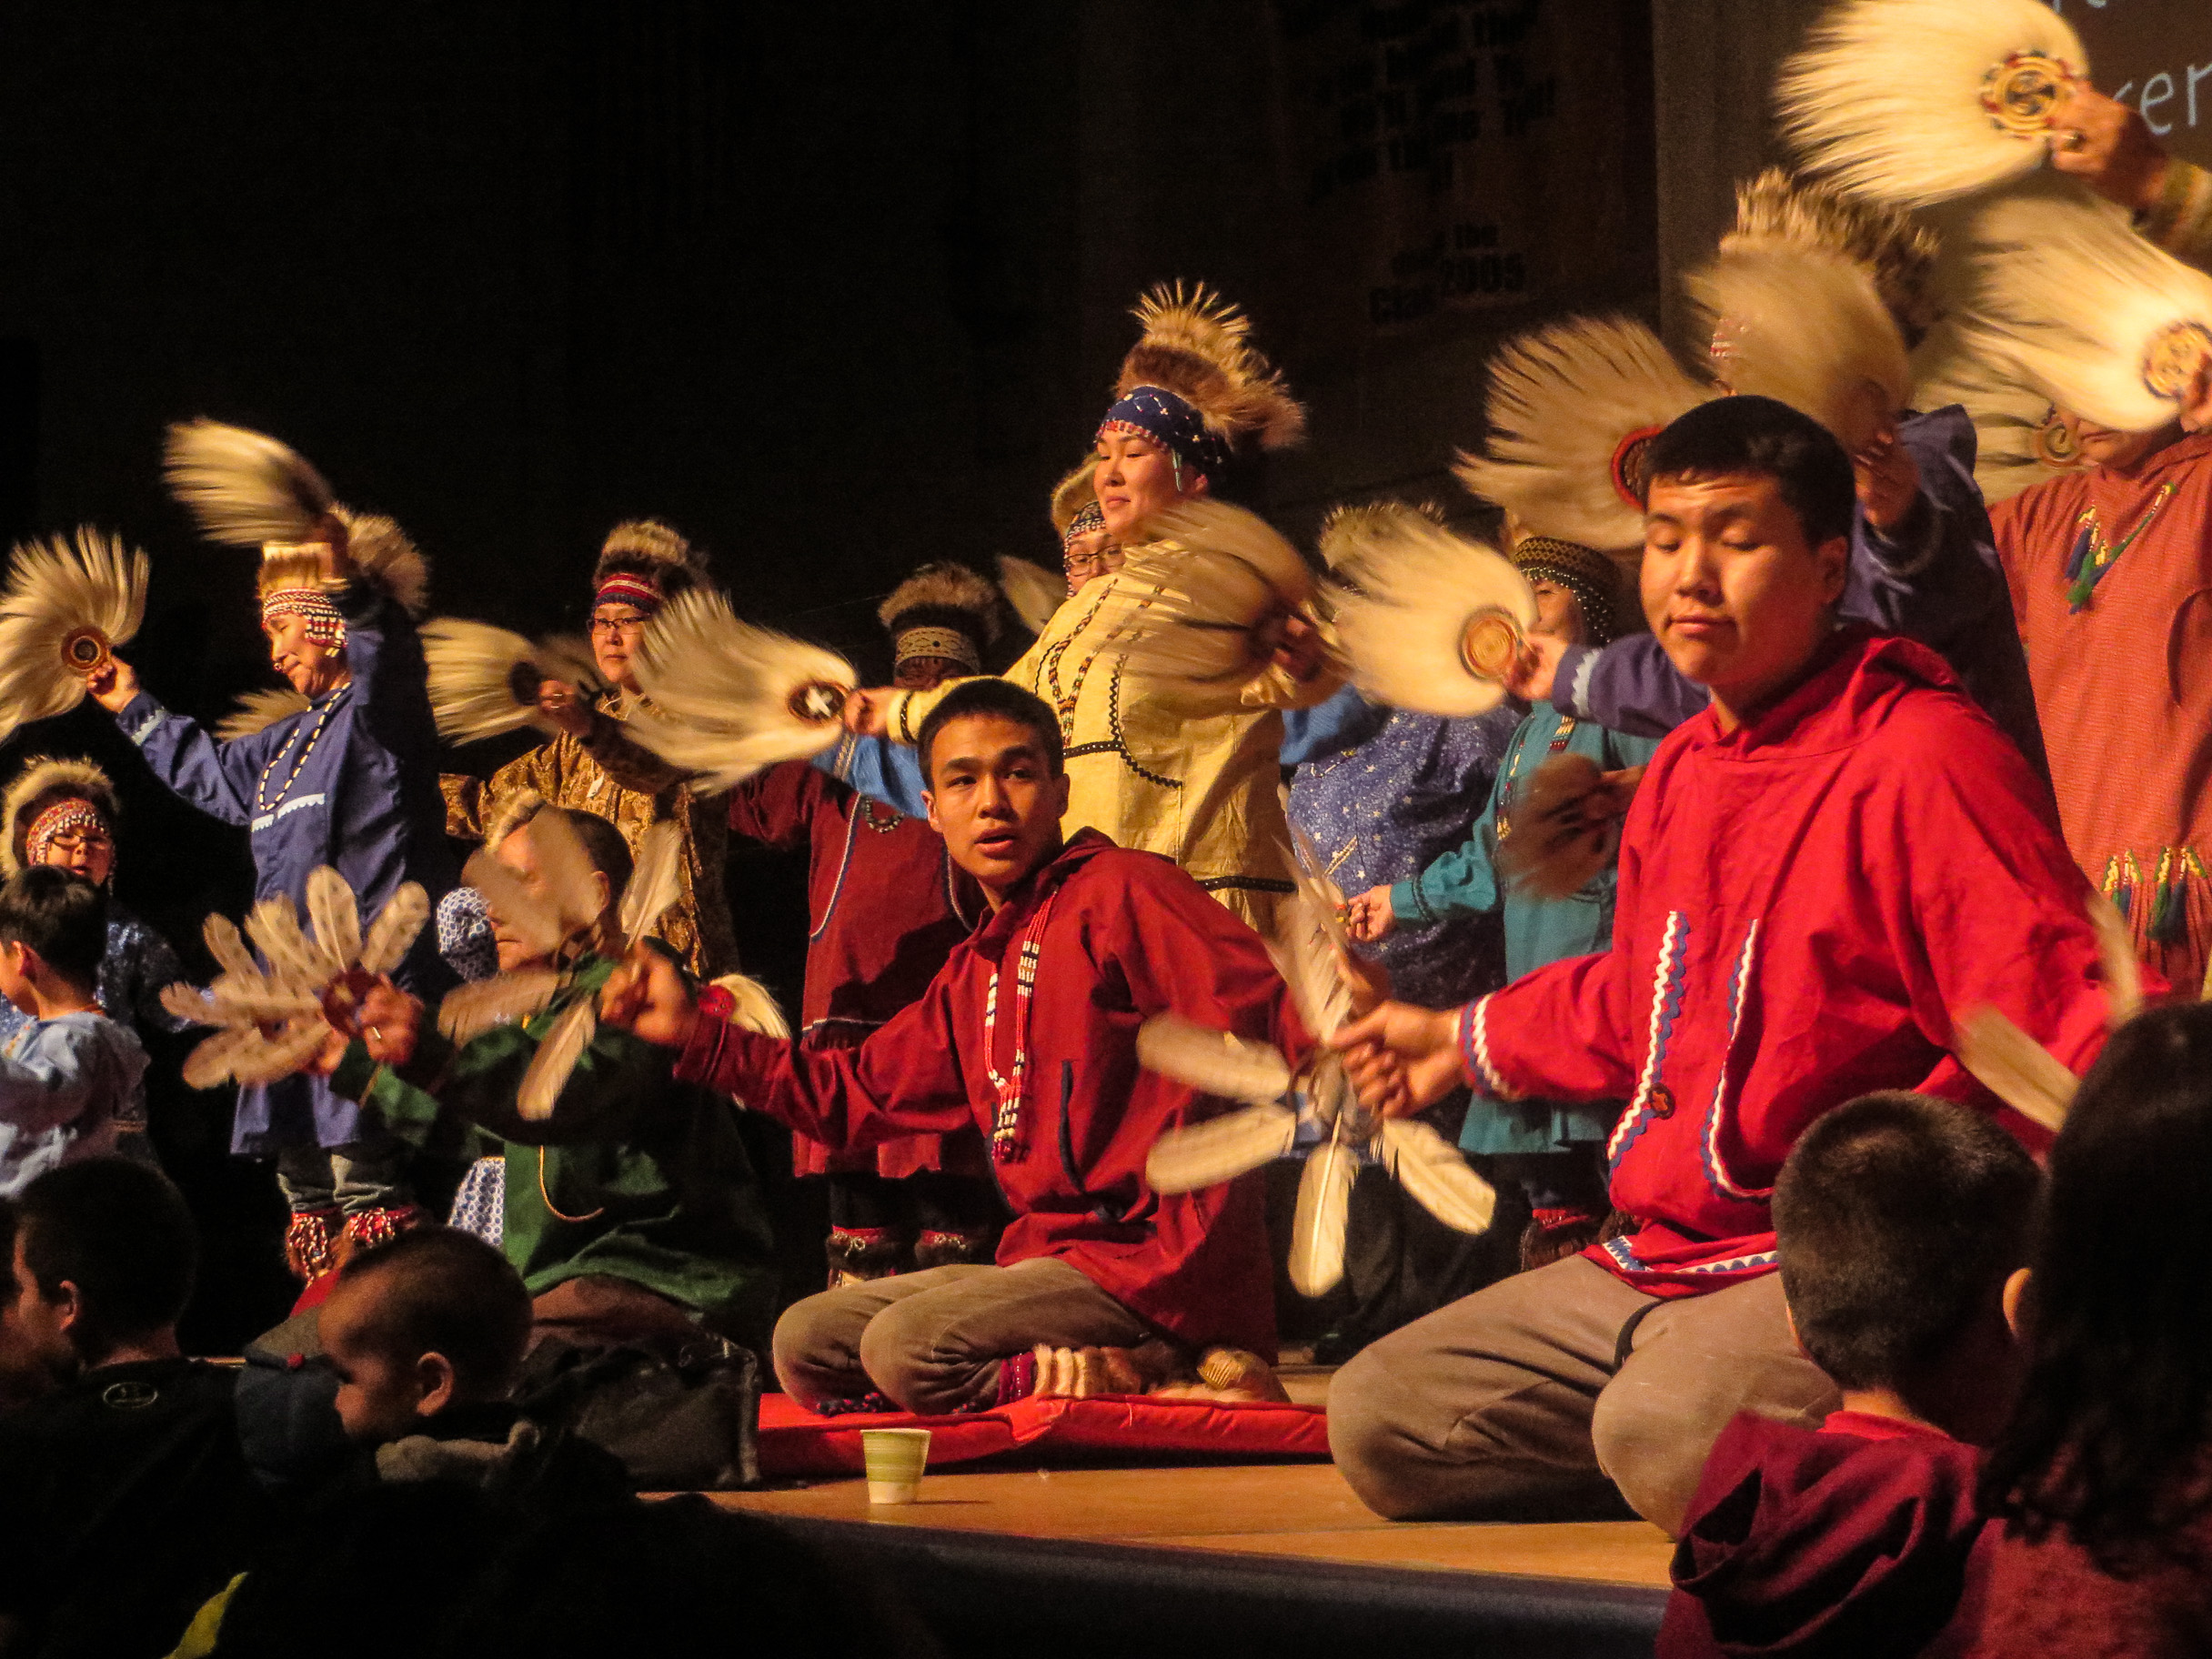 Byron Nicholai performs with the Toksook Bay Traditional Dancers. (Photo by Laura Kraegel, KNOM - Nome)